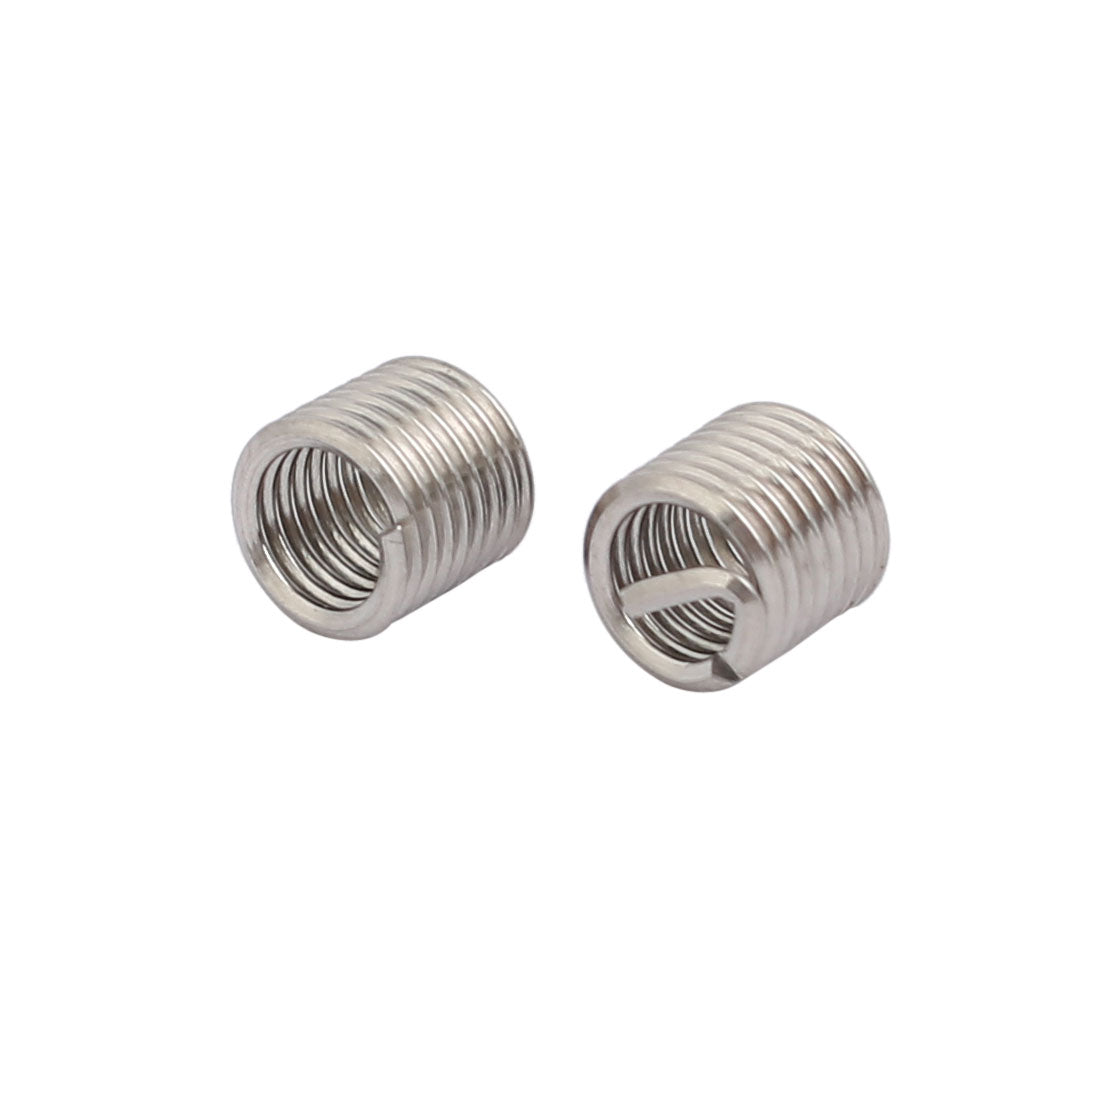 uxcell Uxcell M4x0.7mmx8mm 304 Stainless Steel Helical Coil Wire Thread Insert 50pcs